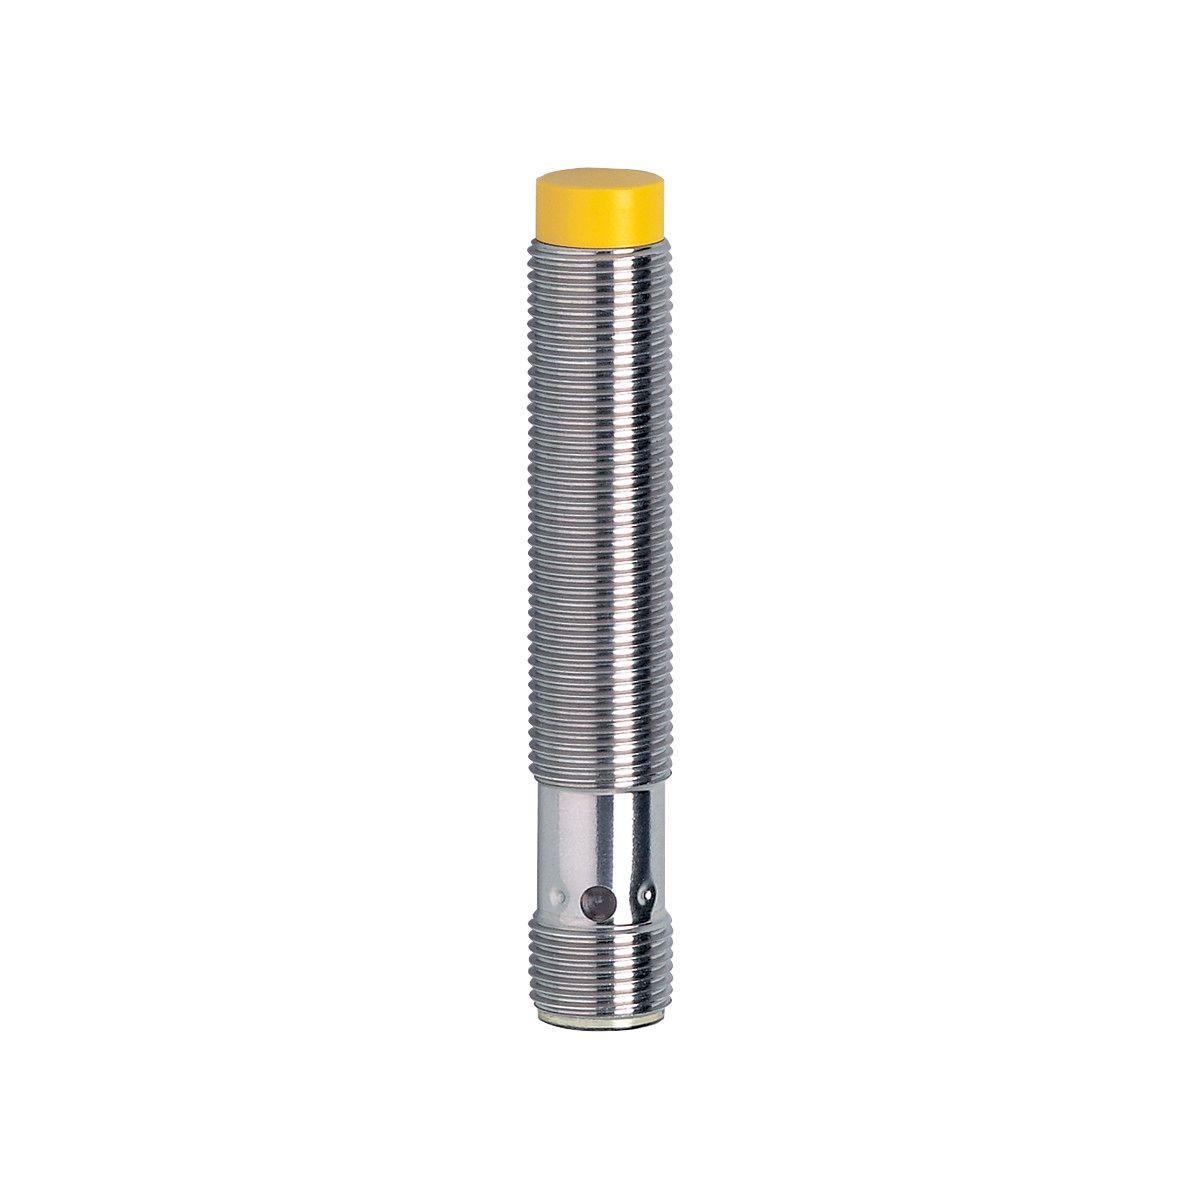 ifm Electronic GF711S Fail-safe inductive sensor, For ensuring machine safety, Electrical design: PNP, Output function: 2 x OSSD (A1 and A2), Enable zone [mm]: 0.5...4, Housing: Threaded type, Dimensions [mm]: M12 x 1 / L = 70, System: gold-plated contacts, Type of operation: 